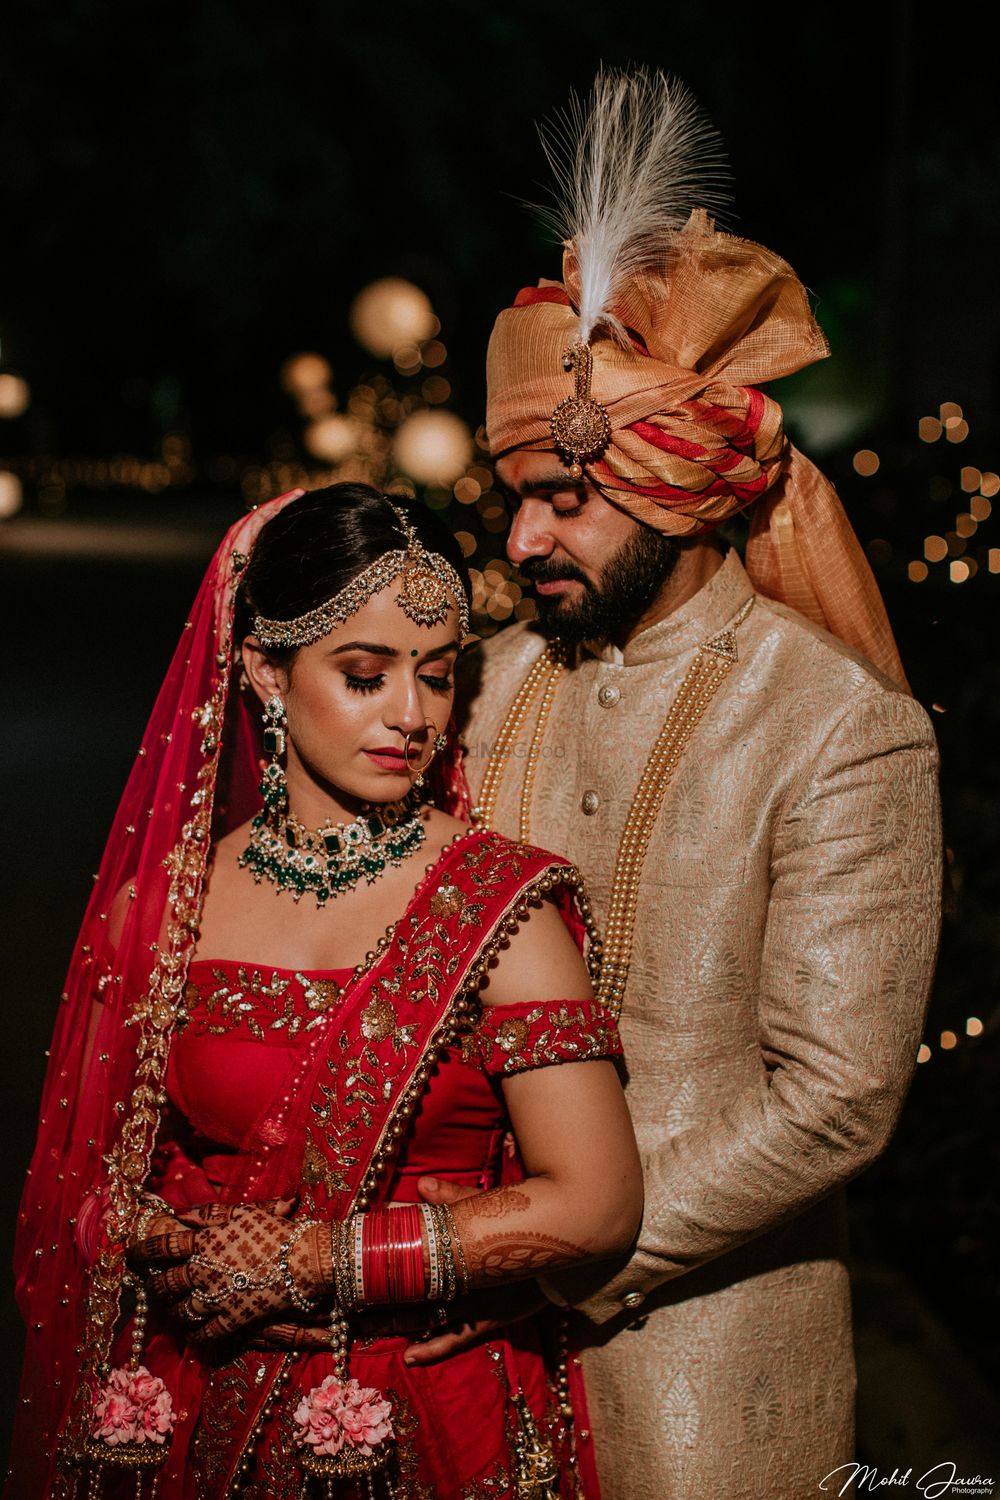 Photo of A bride in red lehenga with floral kalire ppsing with her husband on their wedding day